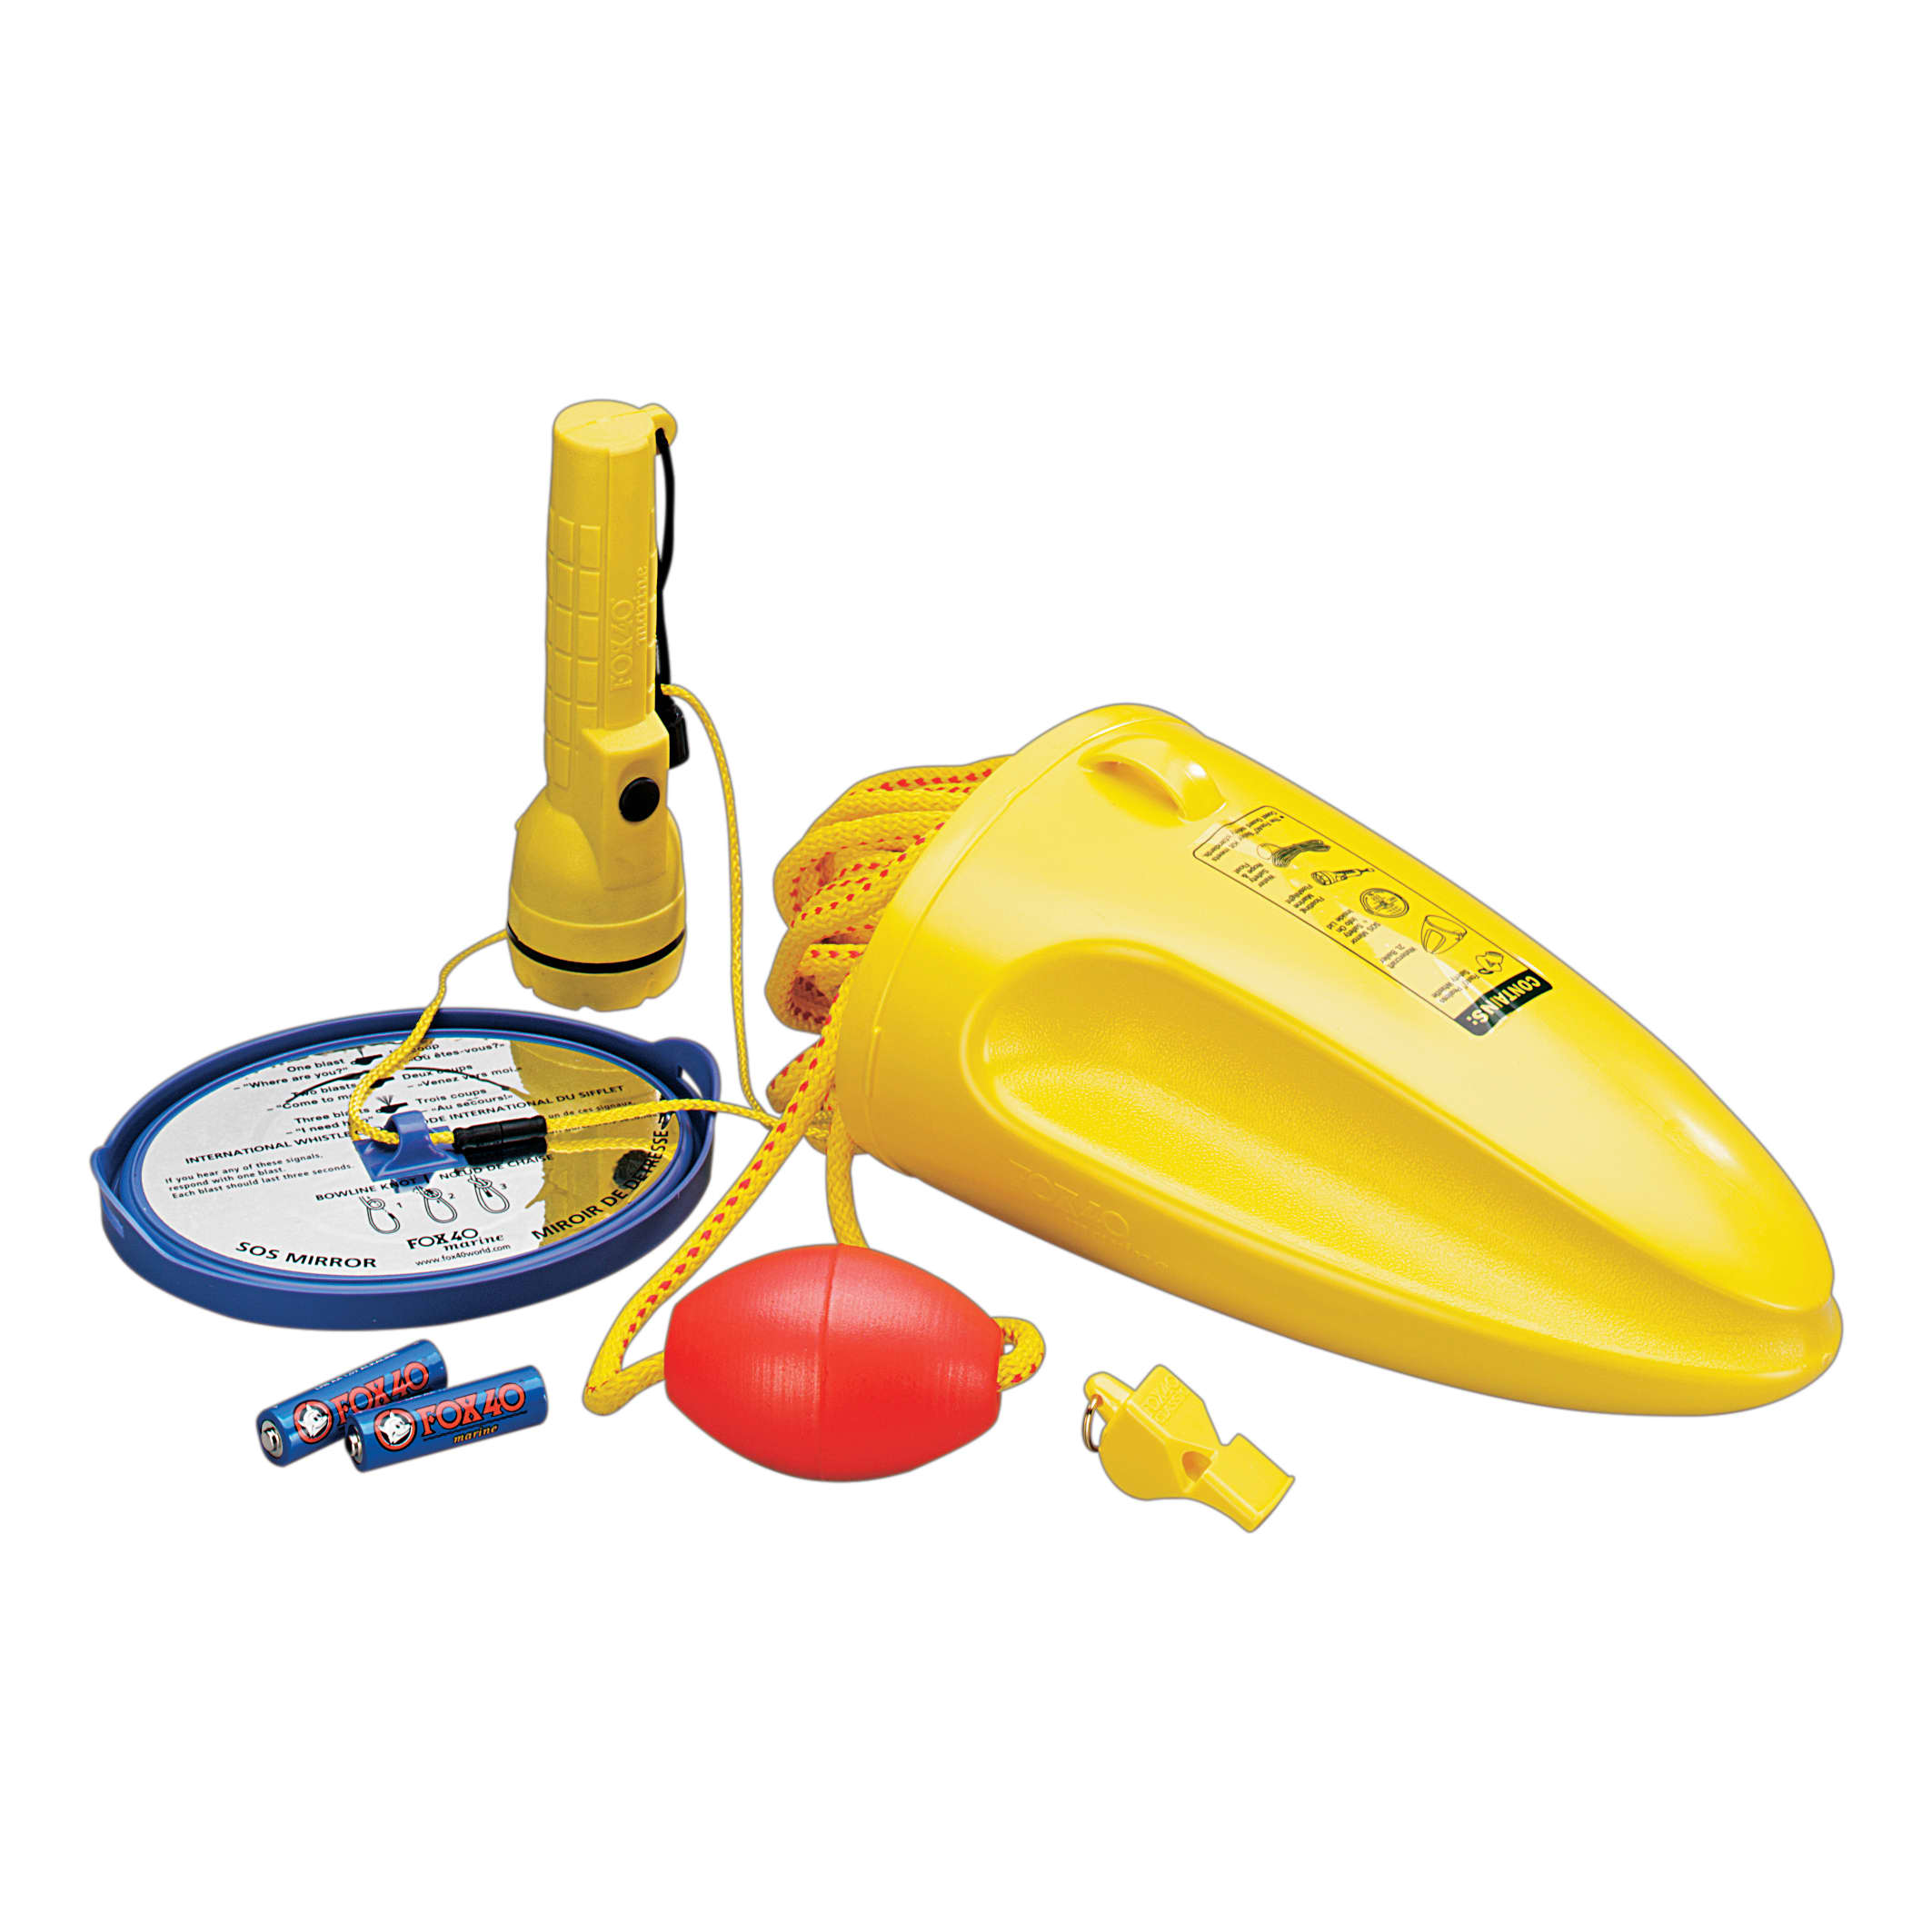 Fox 40 Classic Boat Safety Kit